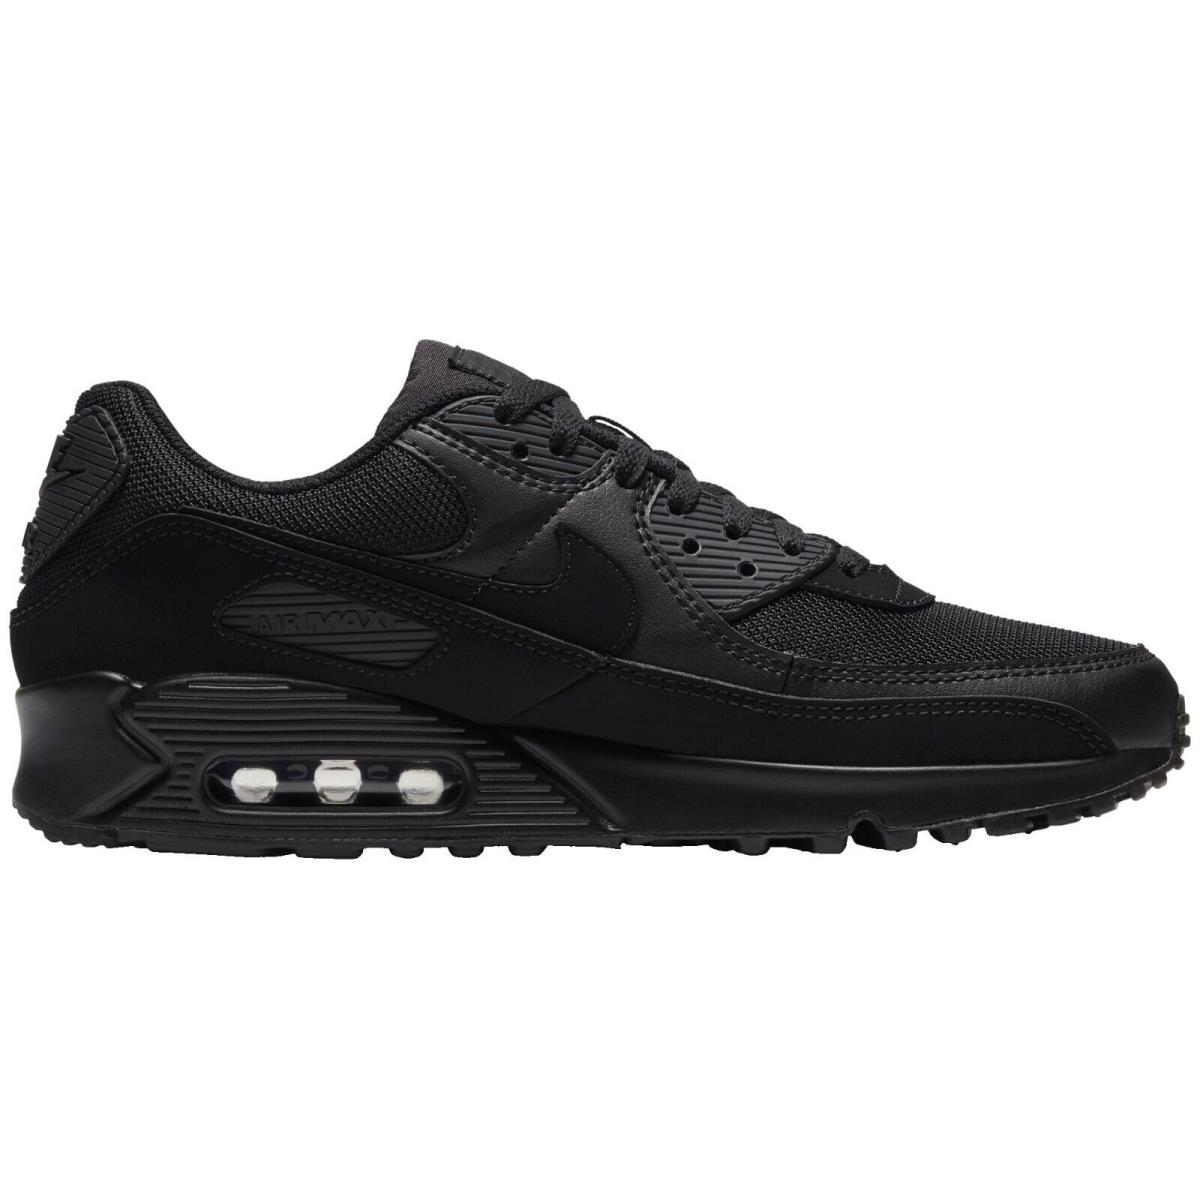 Nike Air Max 90 Men`s Casual Shoes All Colors US Sizes 7-14 Bestseller Triple Black